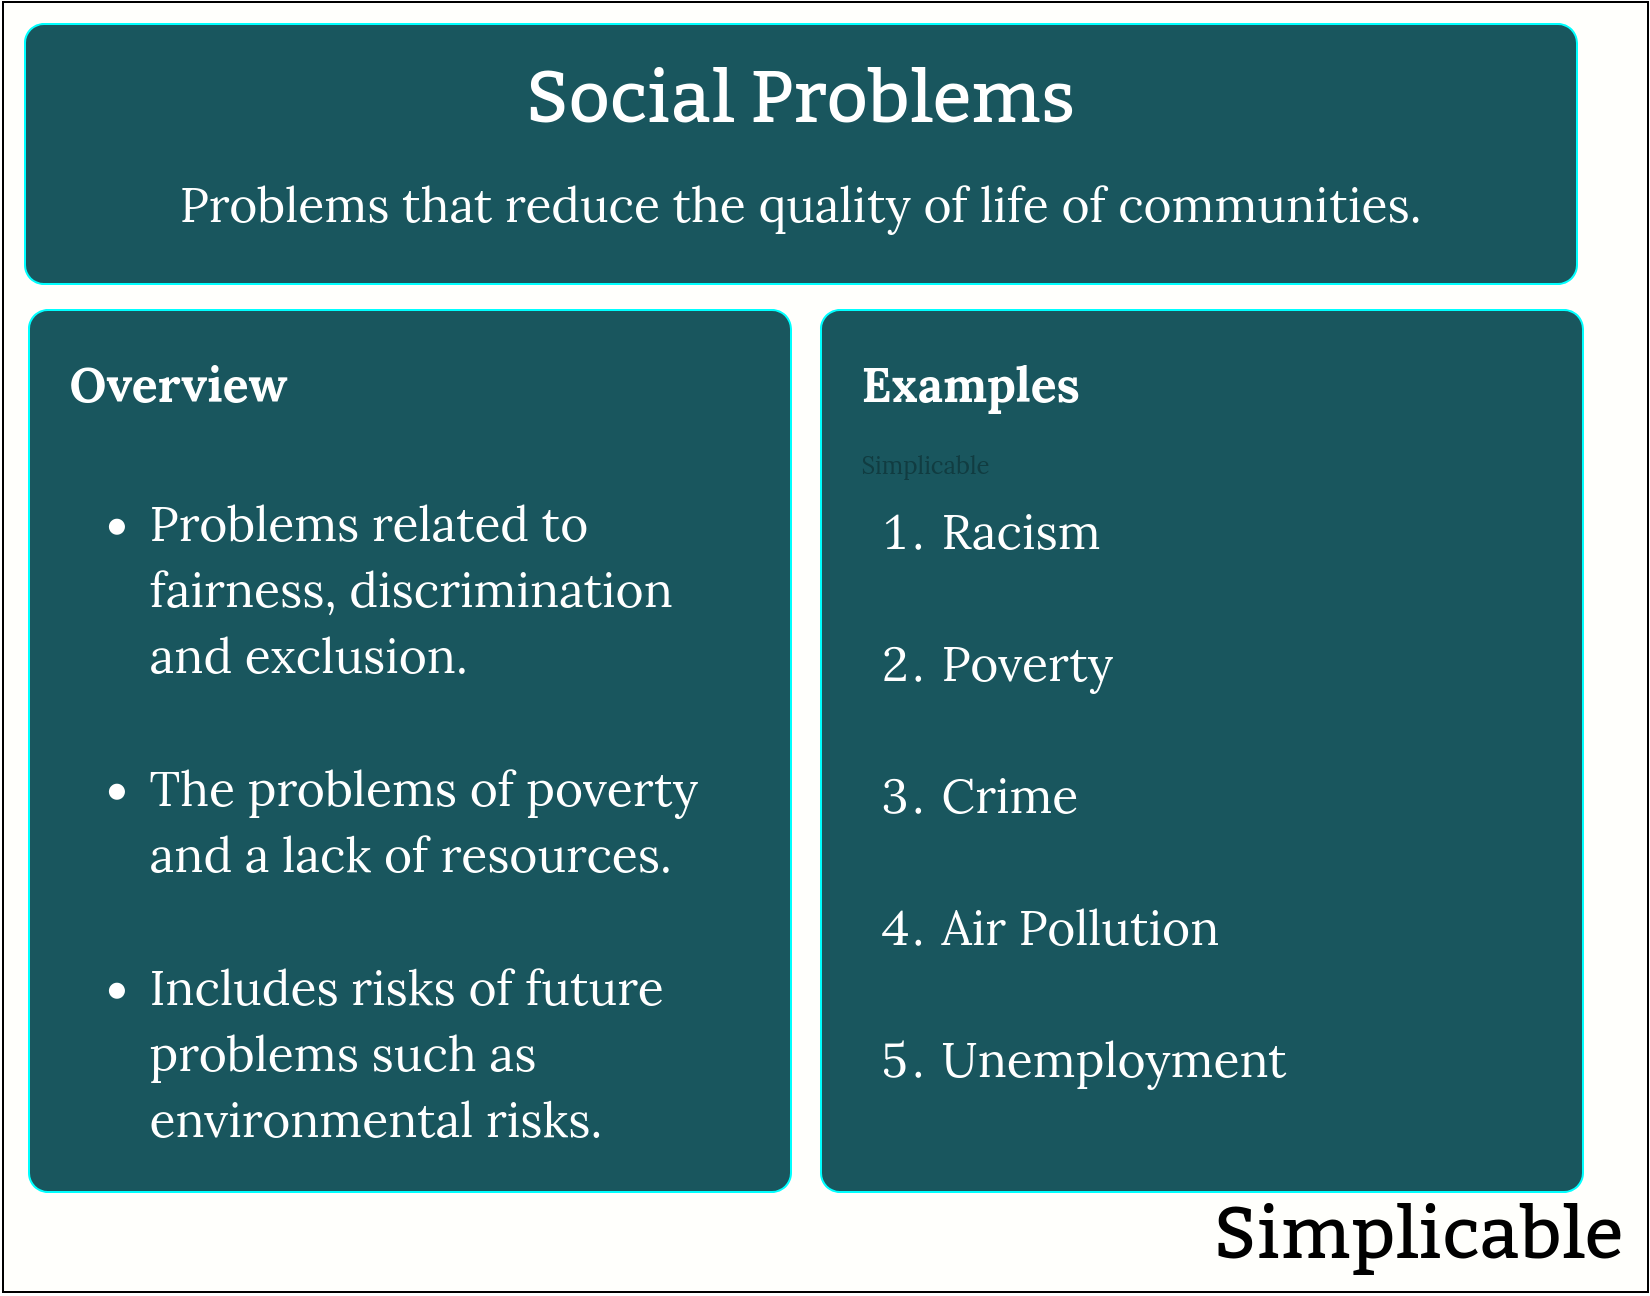 social problems overview simplicable